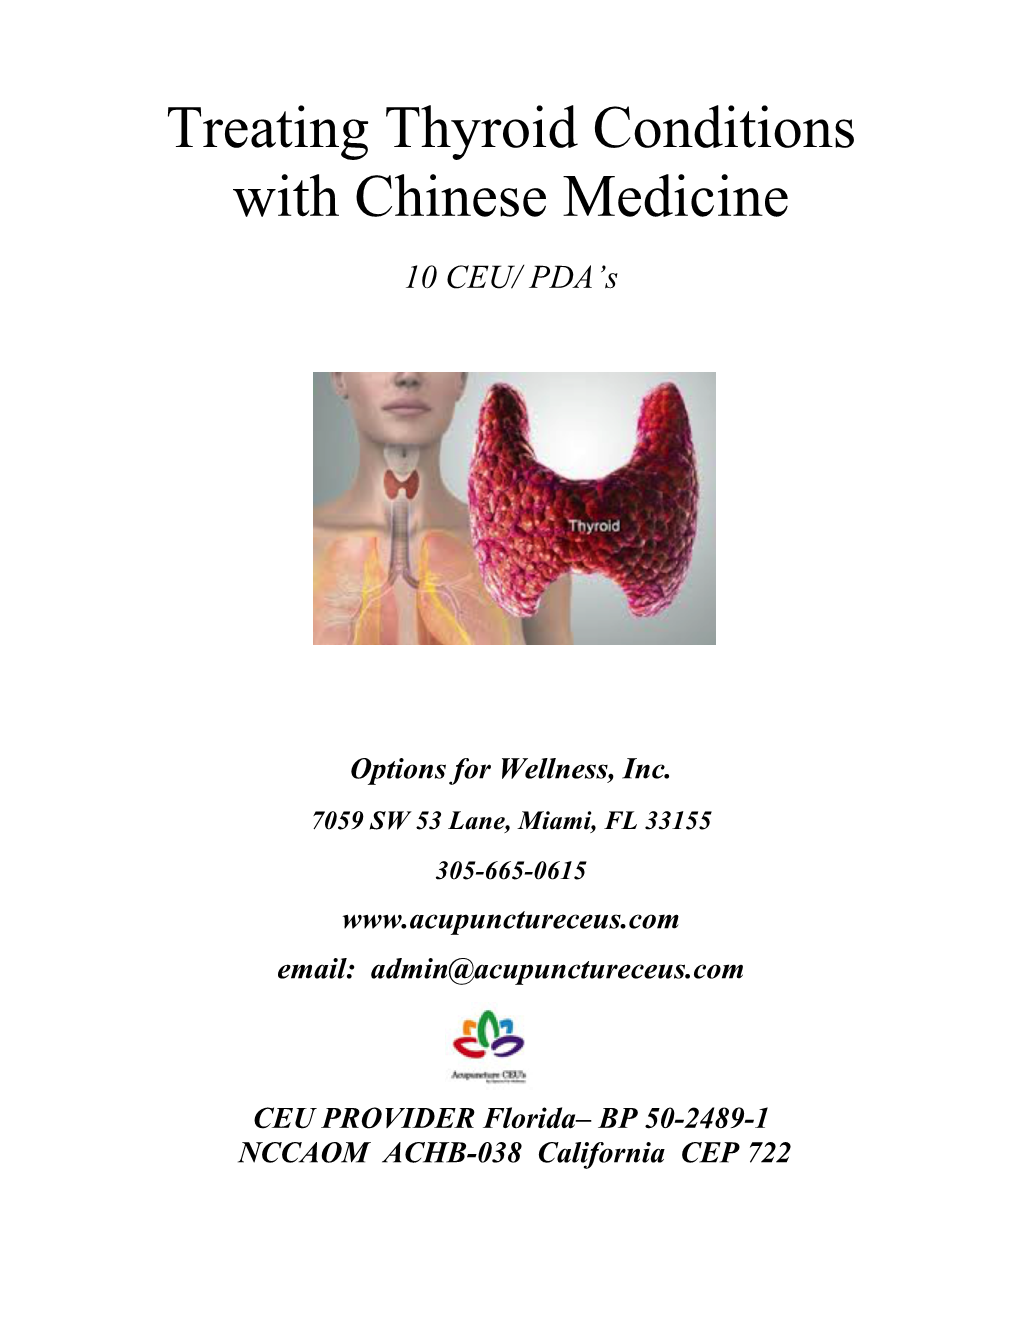 Treating Thyroid Conditions with Chinese Medicine 10 CEU/ PDA’S